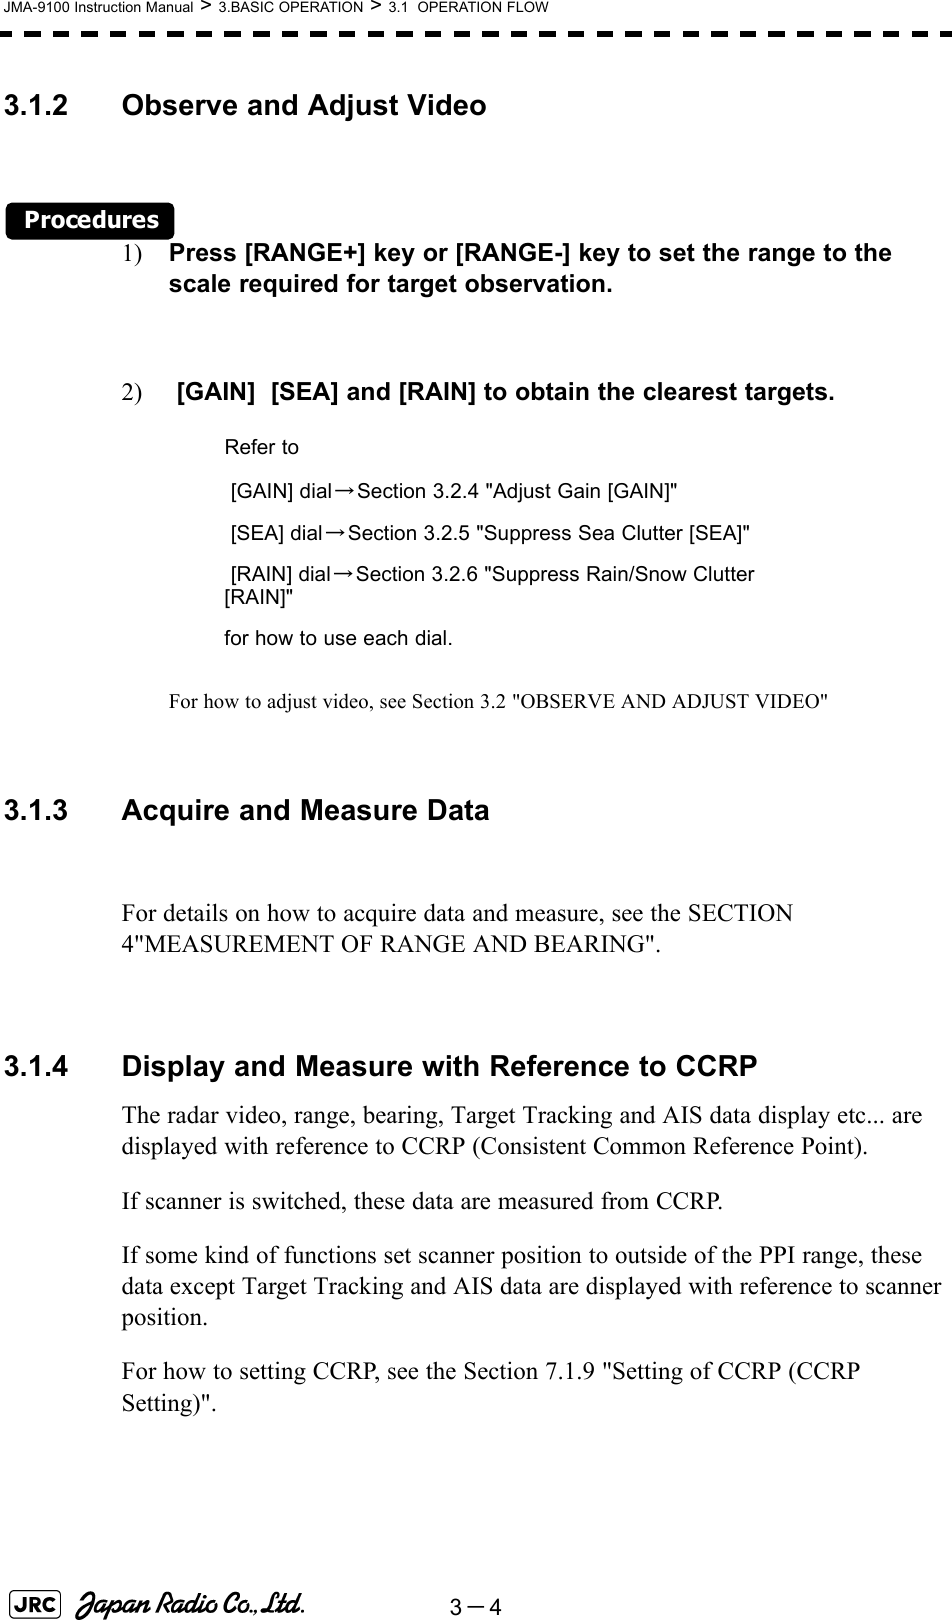 3－4JMA-9100 Instruction Manual &gt; 3.BASIC OPERATION &gt; 3.1  OPERATION FLOW3.1.2 Observe and Adjust VideoProcedures1) Press [RANGE+] key or [RANGE-] key to set the range to the scale required for target observation.2)  [GAIN]  [SEA] and [RAIN] to obtain the clearest targets.For how to adjust video, see Section 3.2 &quot;OBSERVE AND ADJUST VIDEO&quot; 3.1.3 Acquire and Measure DataFor details on how to acquire data and measure, see the SECTION 4&quot;MEASUREMENT OF RANGE AND BEARING&quot;.3.1.4 Display and Measure with Reference to CCRPThe radar video, range, bearing, Target Tracking and AIS data display etc... are displayed with reference to CCRP (Consistent Common Reference Point).If scanner is switched, these data are measured from CCRP.If some kind of functions set scanner position to outside of the PPI range, these data except Target Tracking and AIS data are displayed with reference to scanner position.For how to setting CCRP, see the Section 7.1.9 &quot;Setting of CCRP (CCRP Setting)&quot;. Refer to [GAIN] dial→Section 3.2.4 &quot;Adjust Gain [GAIN]&quot; [SEA] dial→Section 3.2.5 &quot;Suppress Sea Clutter [SEA]&quot; [RAIN] dial→Section 3.2.6 &quot;Suppress Rain/Snow Clutter [RAIN]&quot;for how to use each dial.